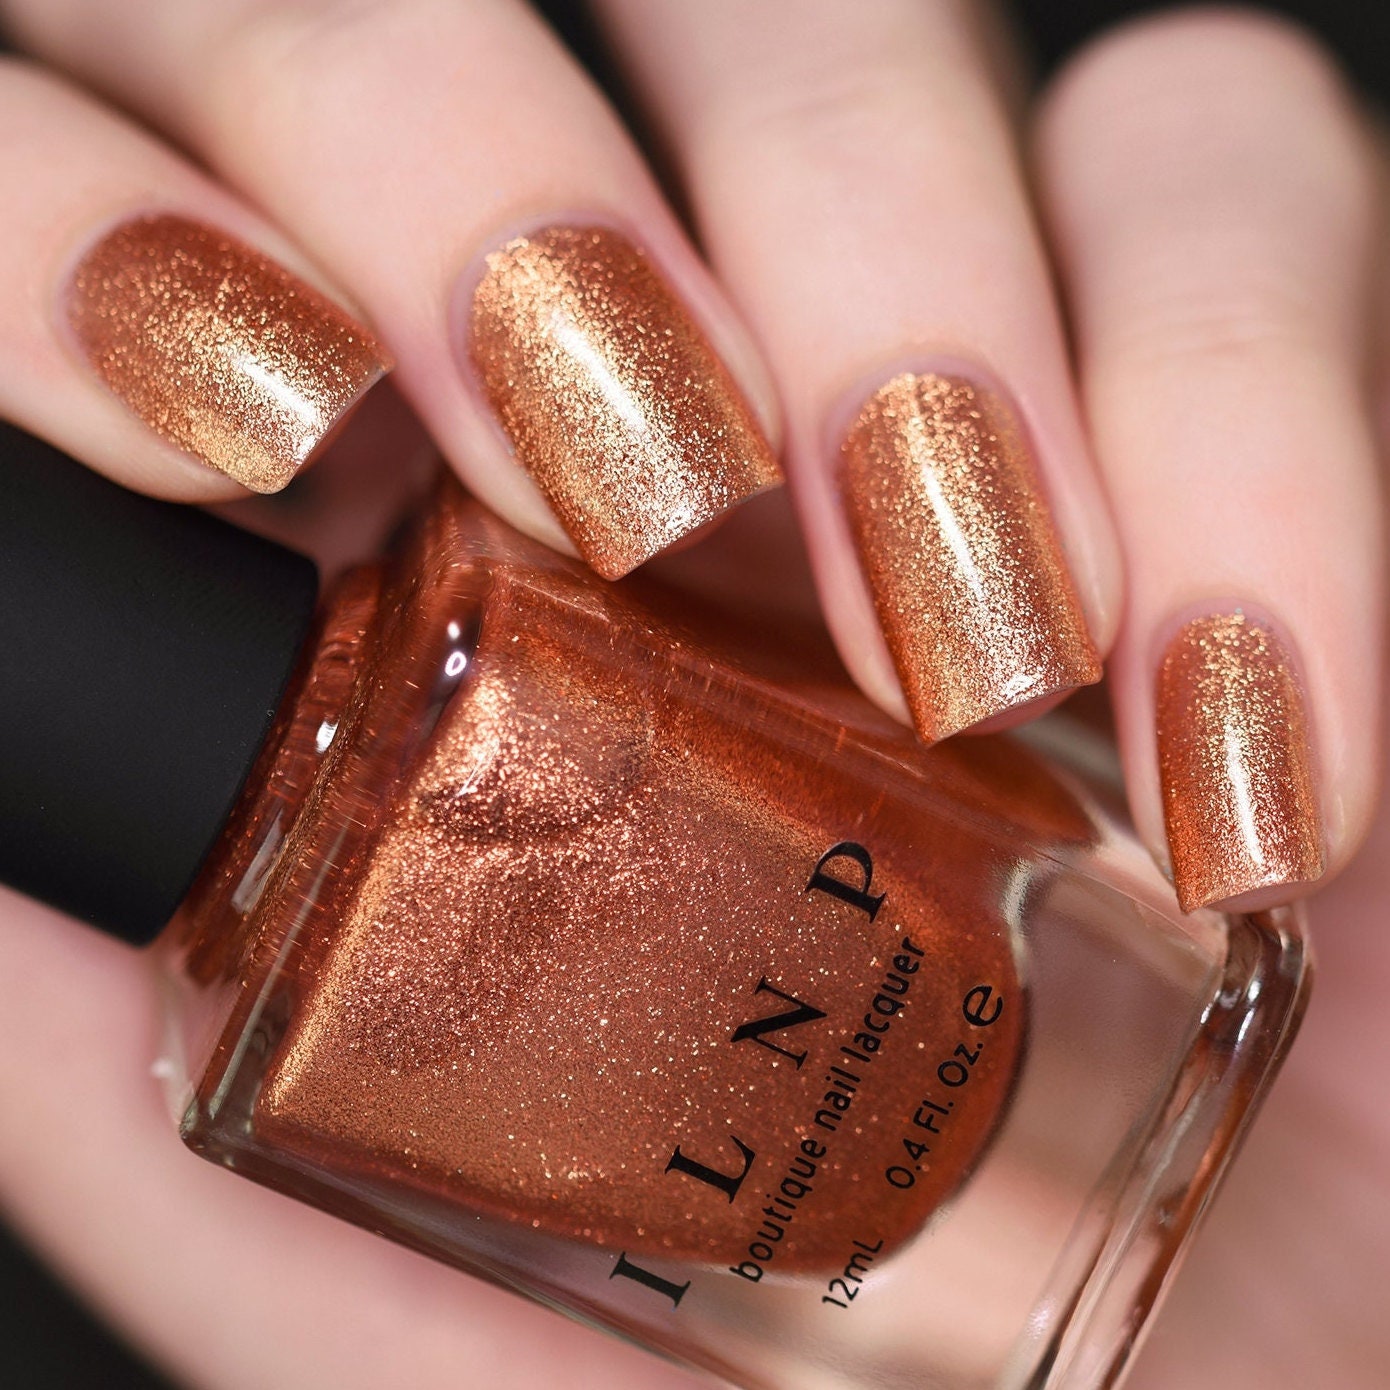 Sally Hansen Lustre Shine in Copperhead Swatches + Review! - All Things  Beautiful XO